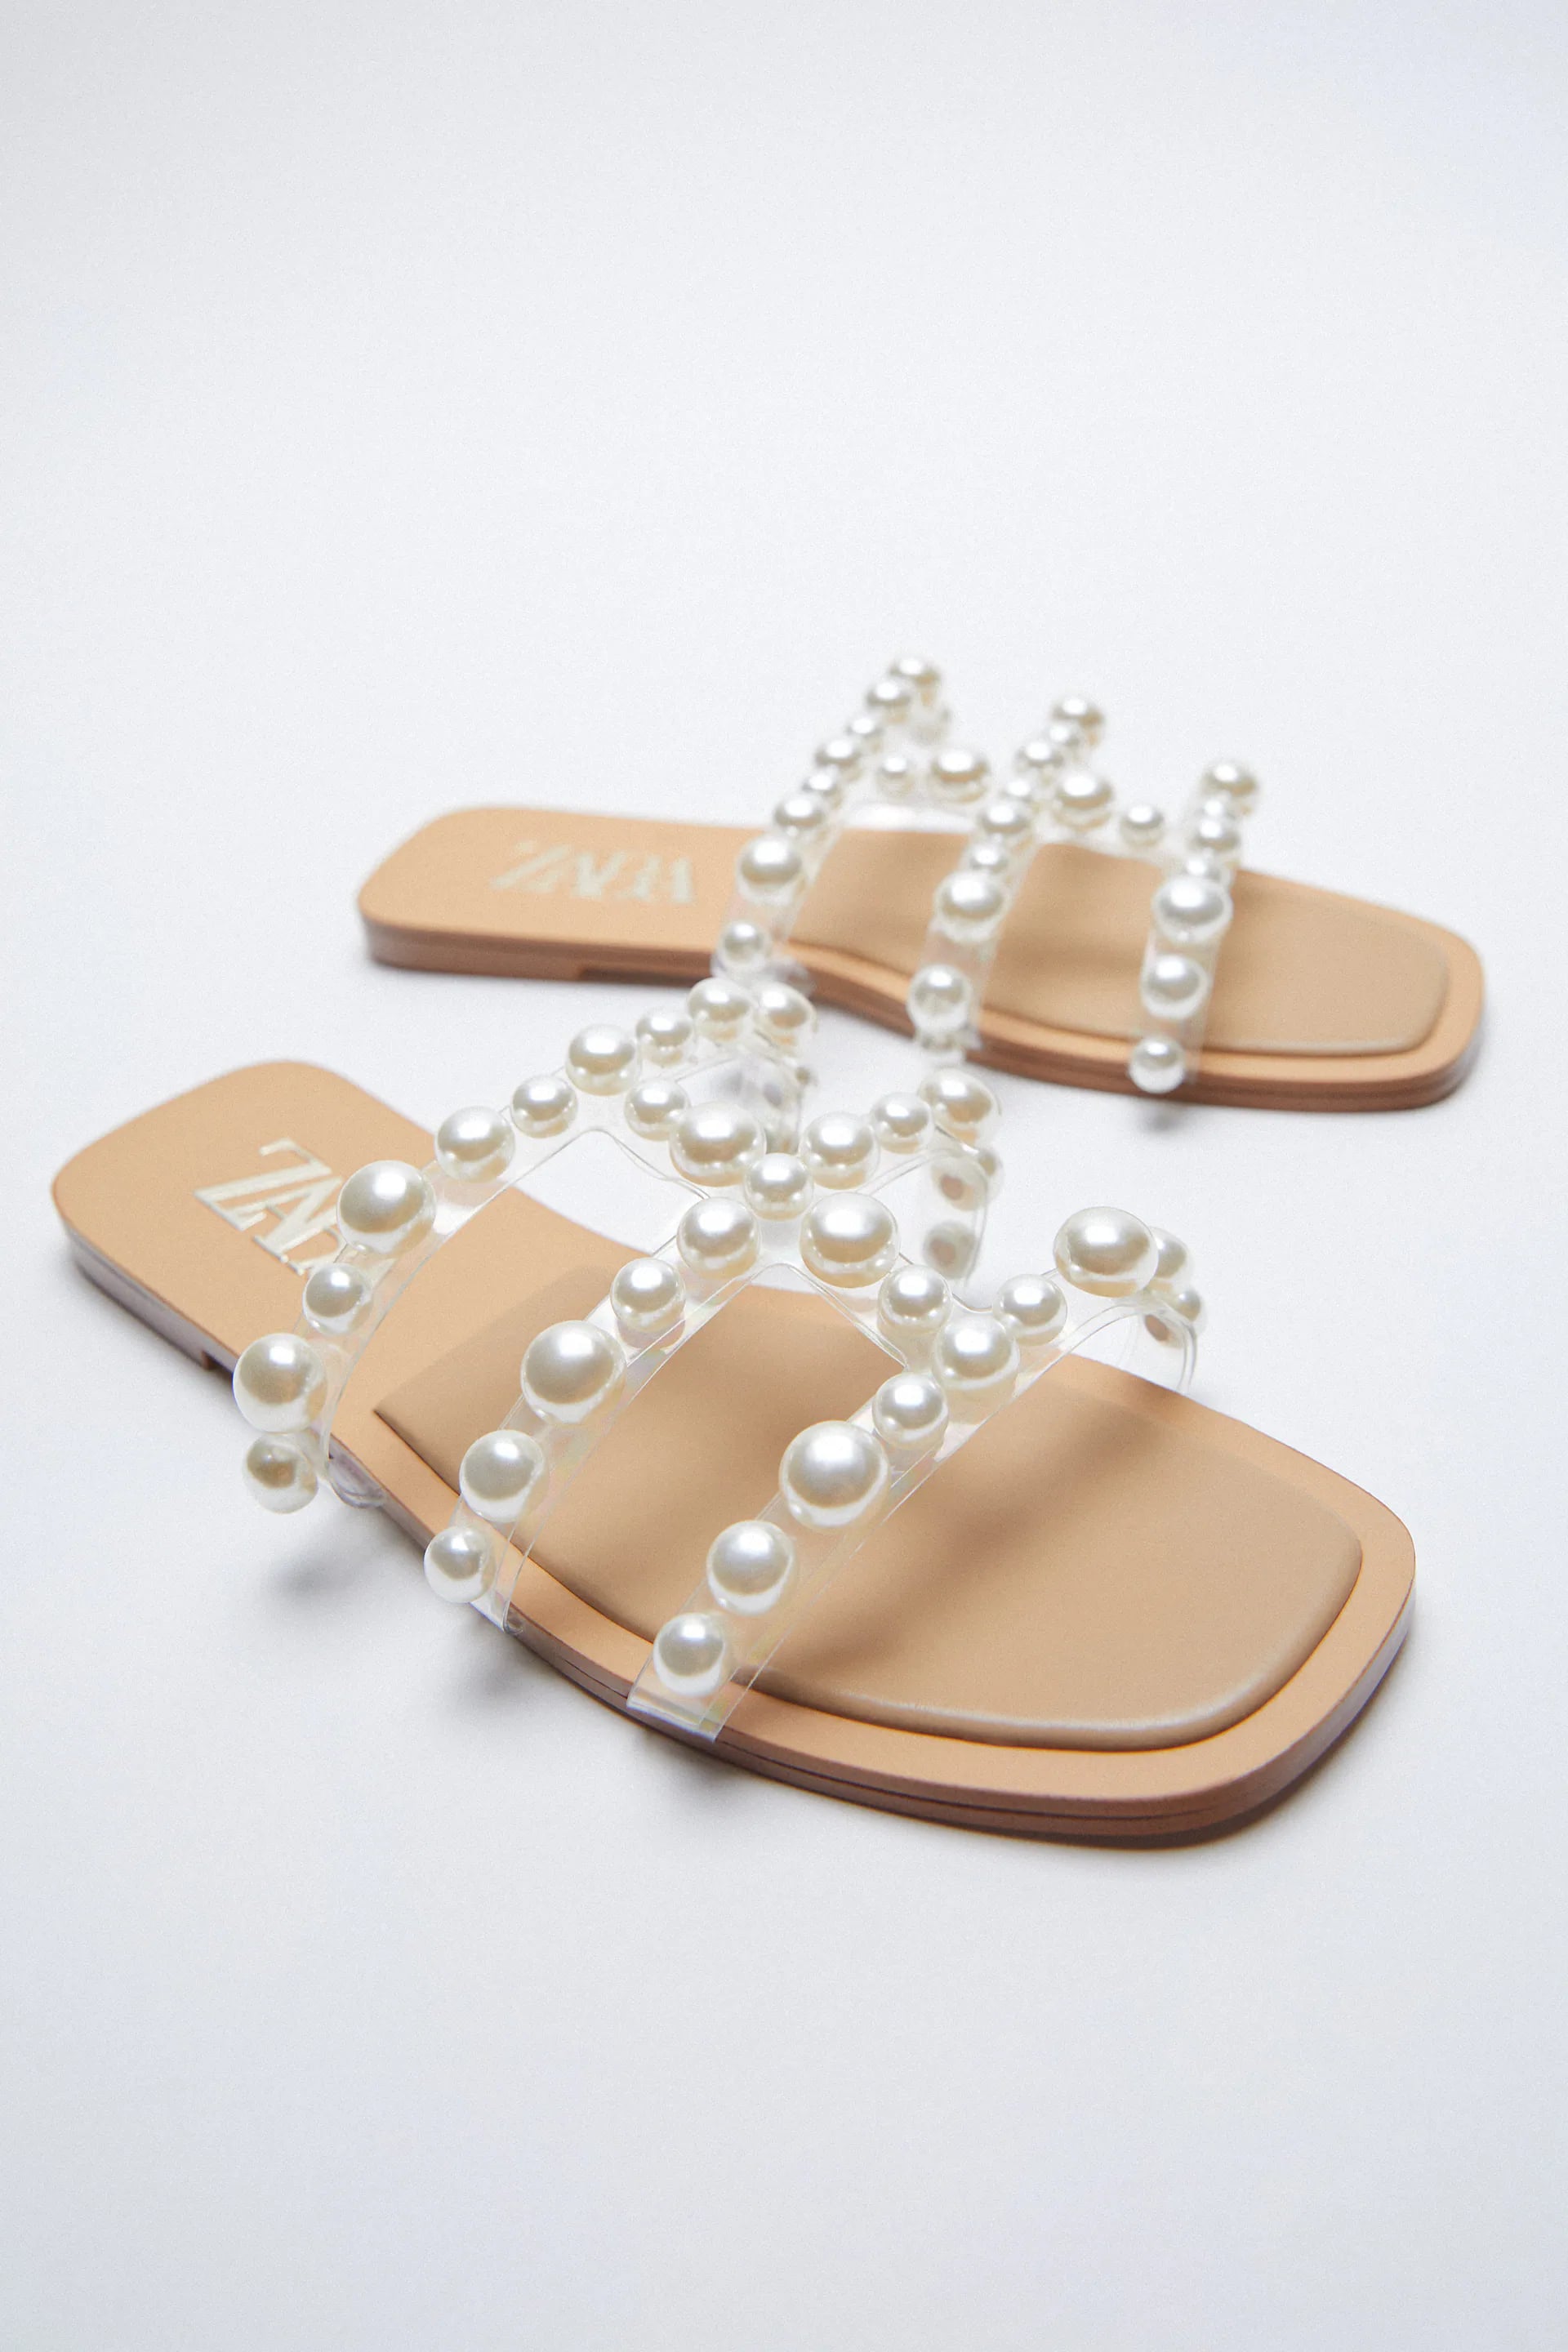 Products - white-pearl-sandal - white-pearl-sandal